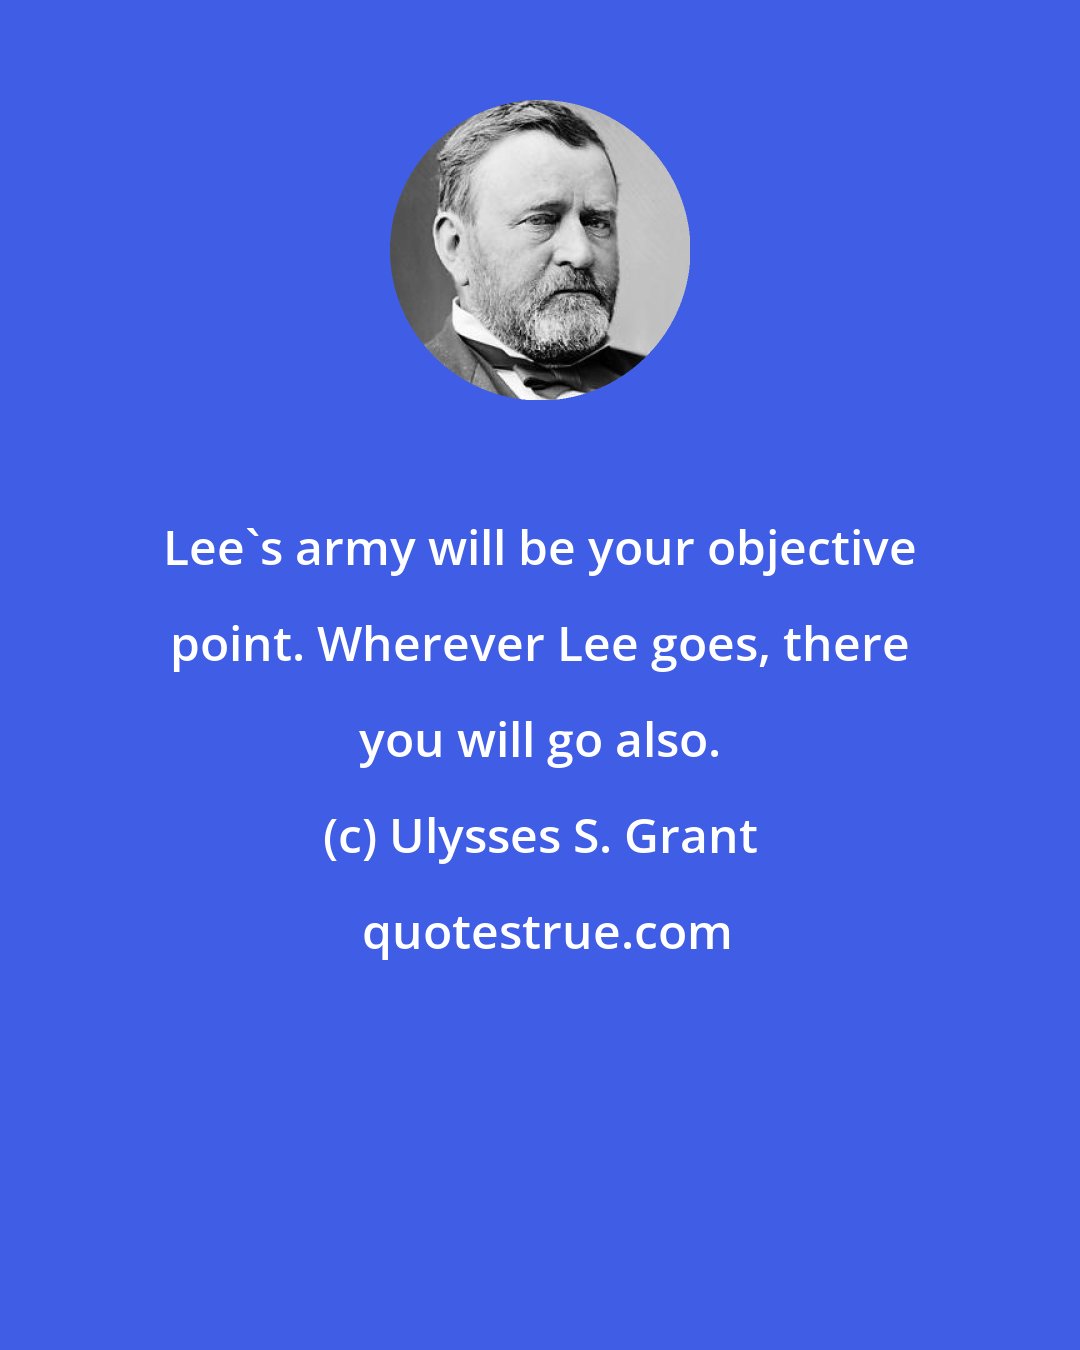 Ulysses S. Grant: Lee's army will be your objective point. Wherever Lee goes, there you will go also.